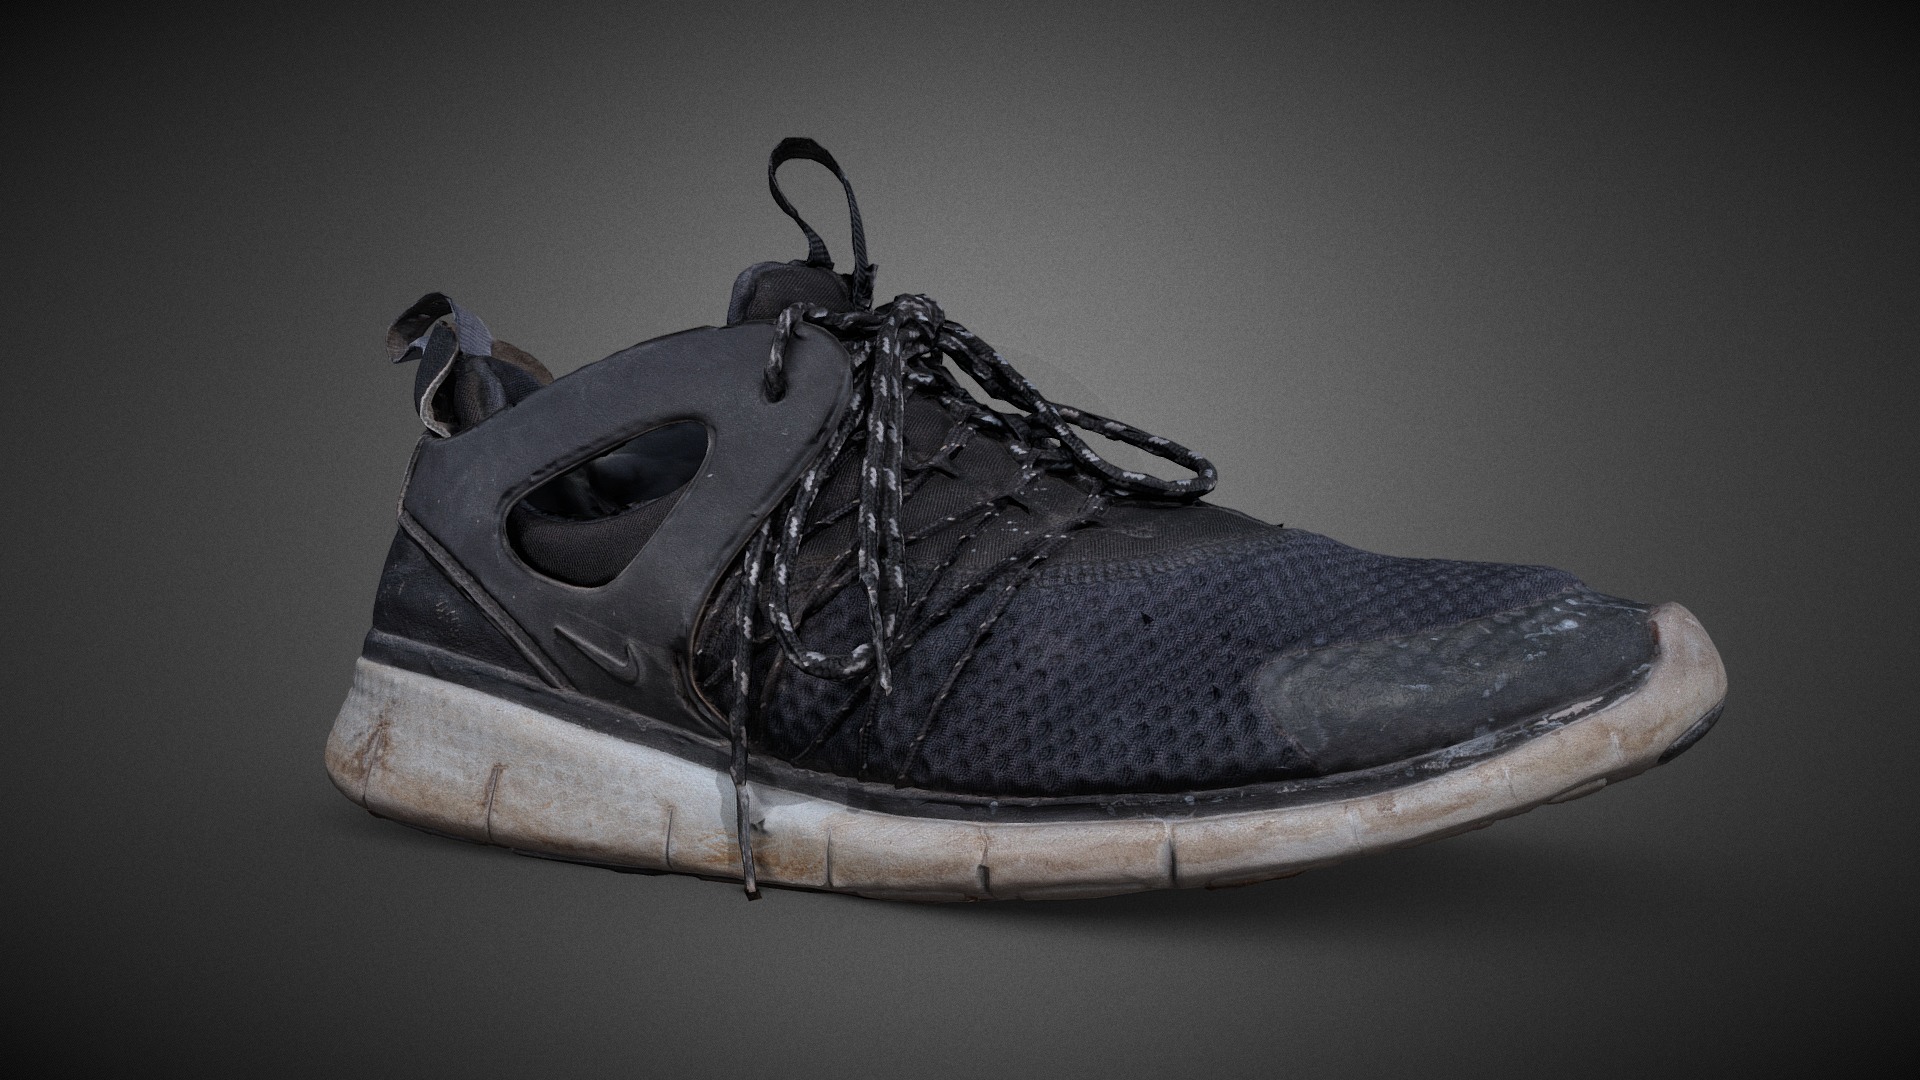 3D model Nike WMNS Free Viritous - This is a 3D model of the Nike WMNS Free Viritous. The 3D model is about a black and white shoe.